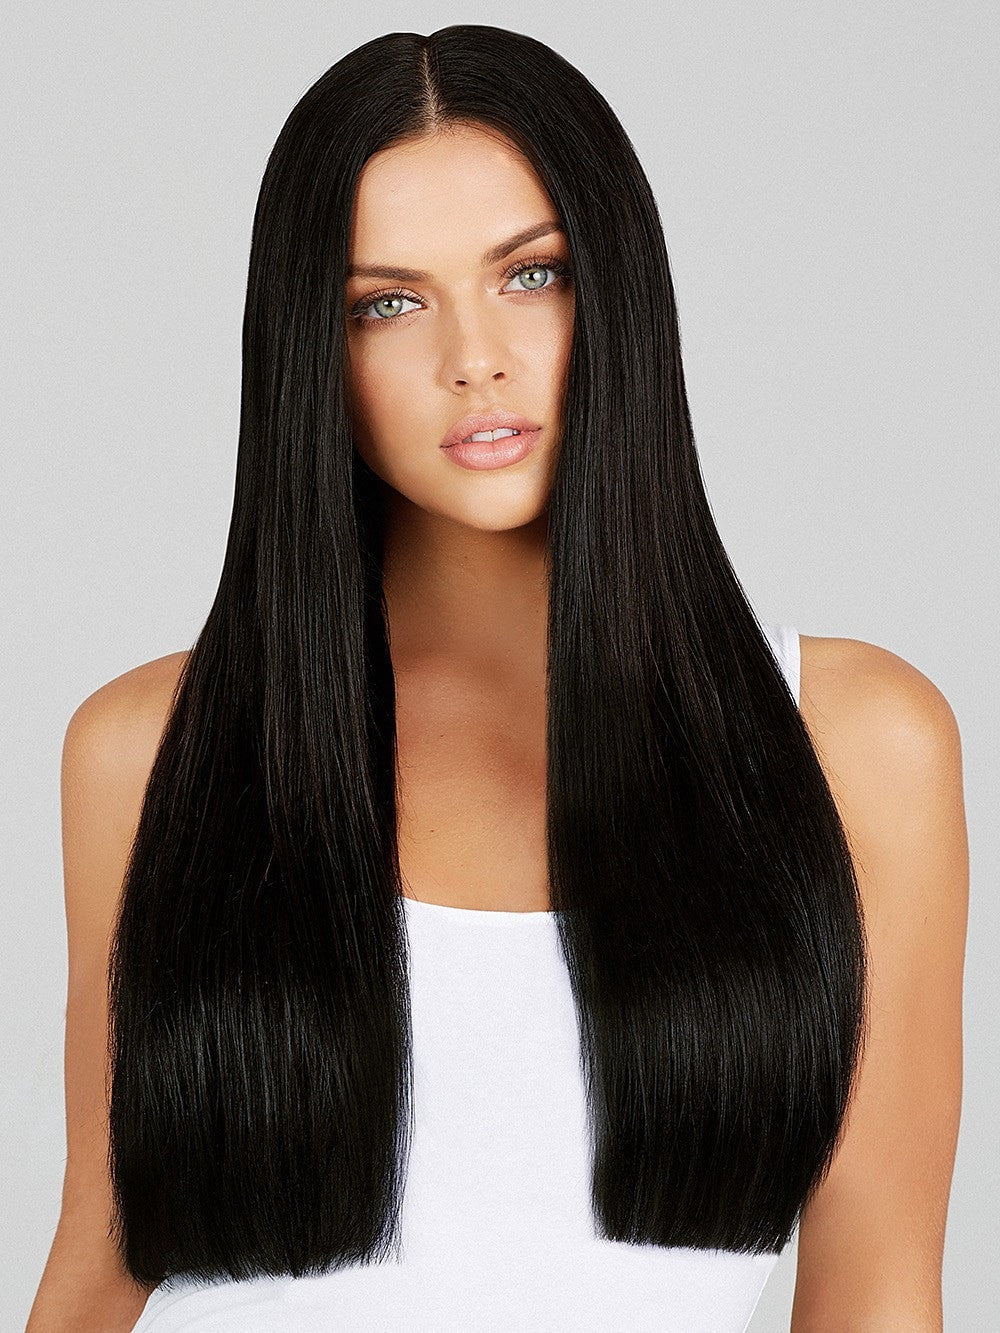 24" Clip-In Extensions 200 grams by LEYLA MILANI in 1B | NATURAL BLACK